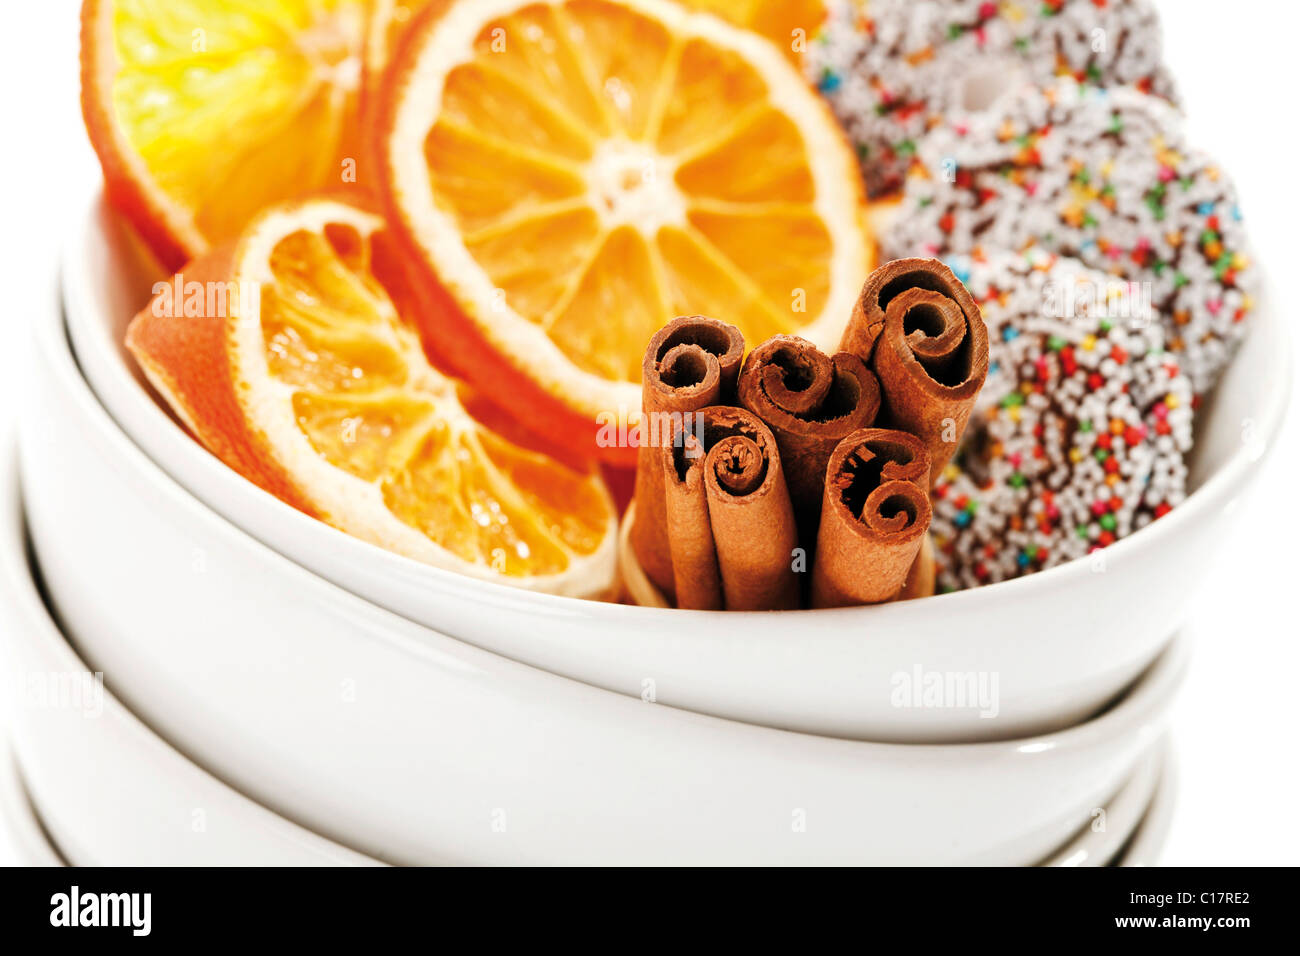 Dried organge slices with cinnammon sticks and chocolate rings in heap of white bowls, close-up Stock Photo